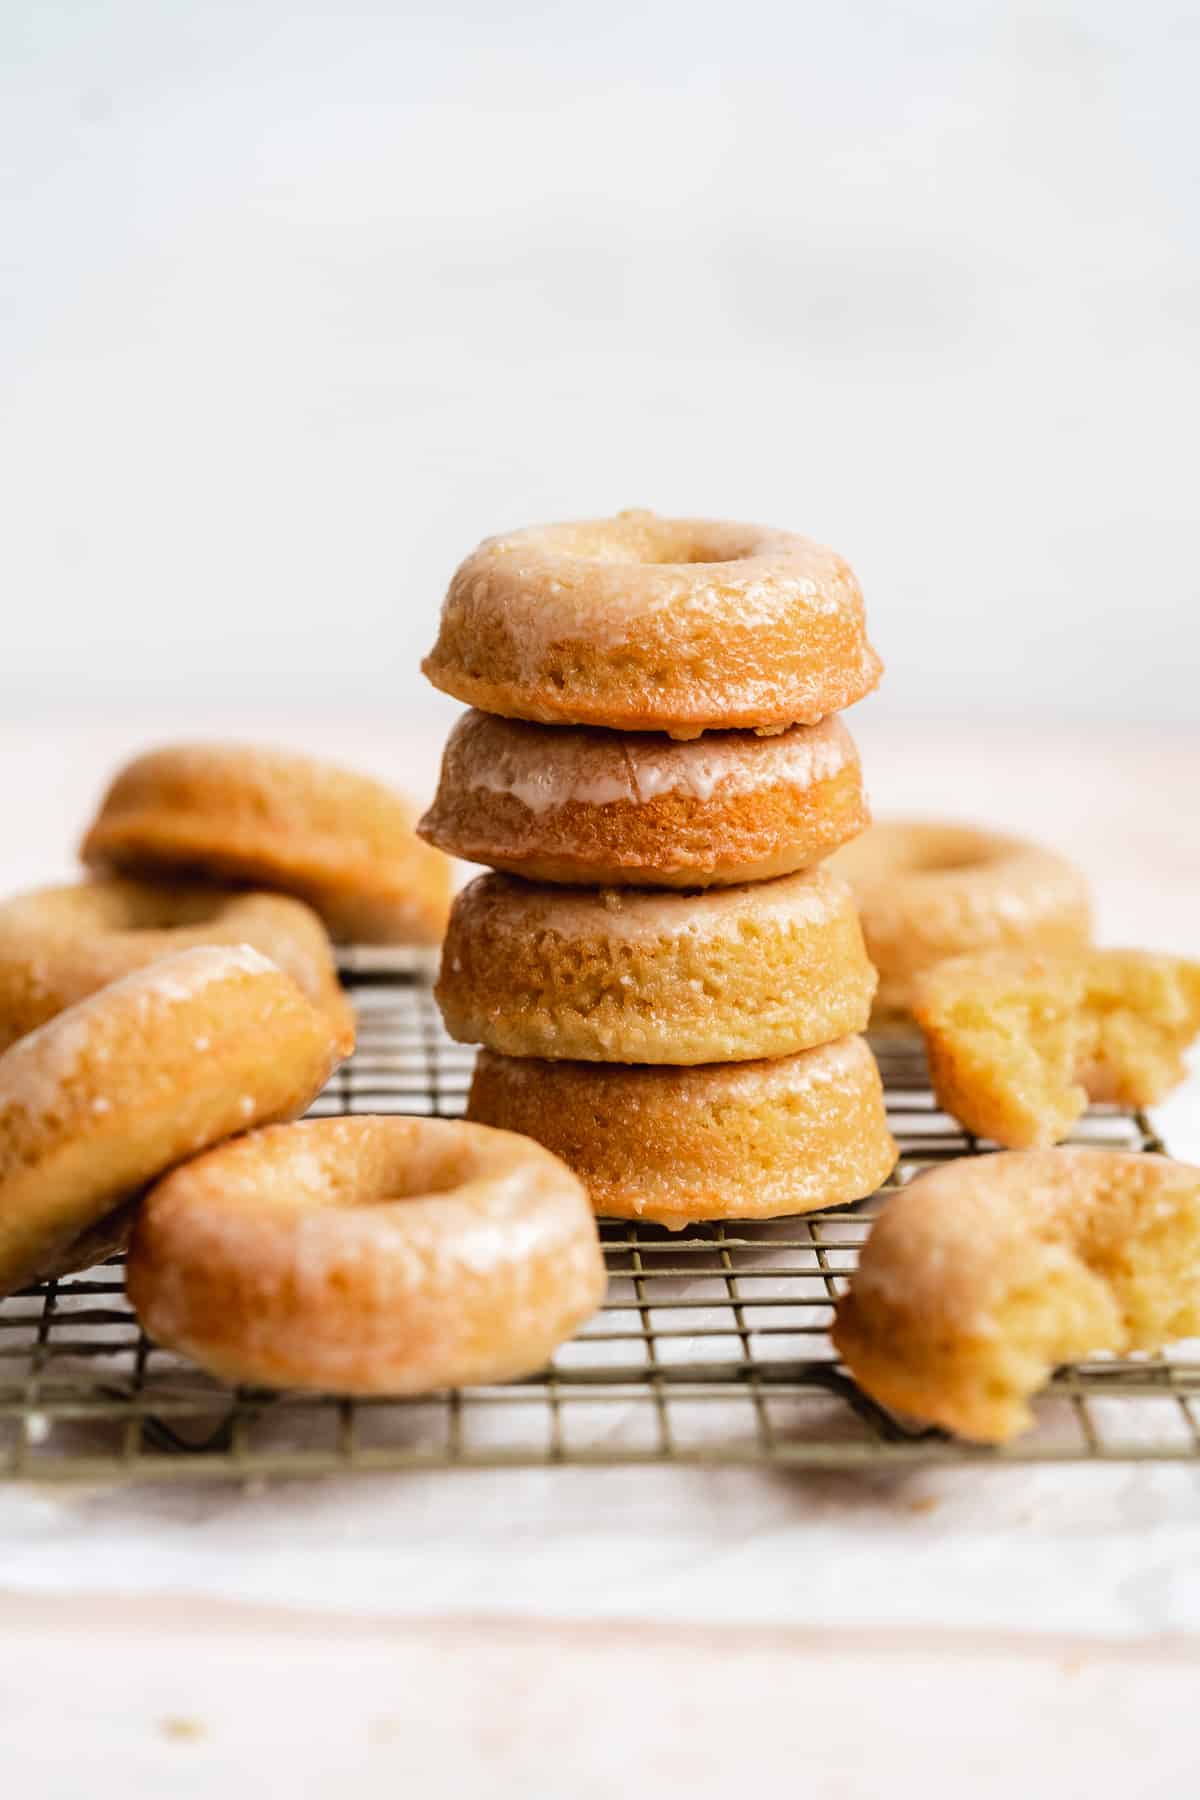 Glazed donuts stacked on a wire rack with donuts scattered on surface.